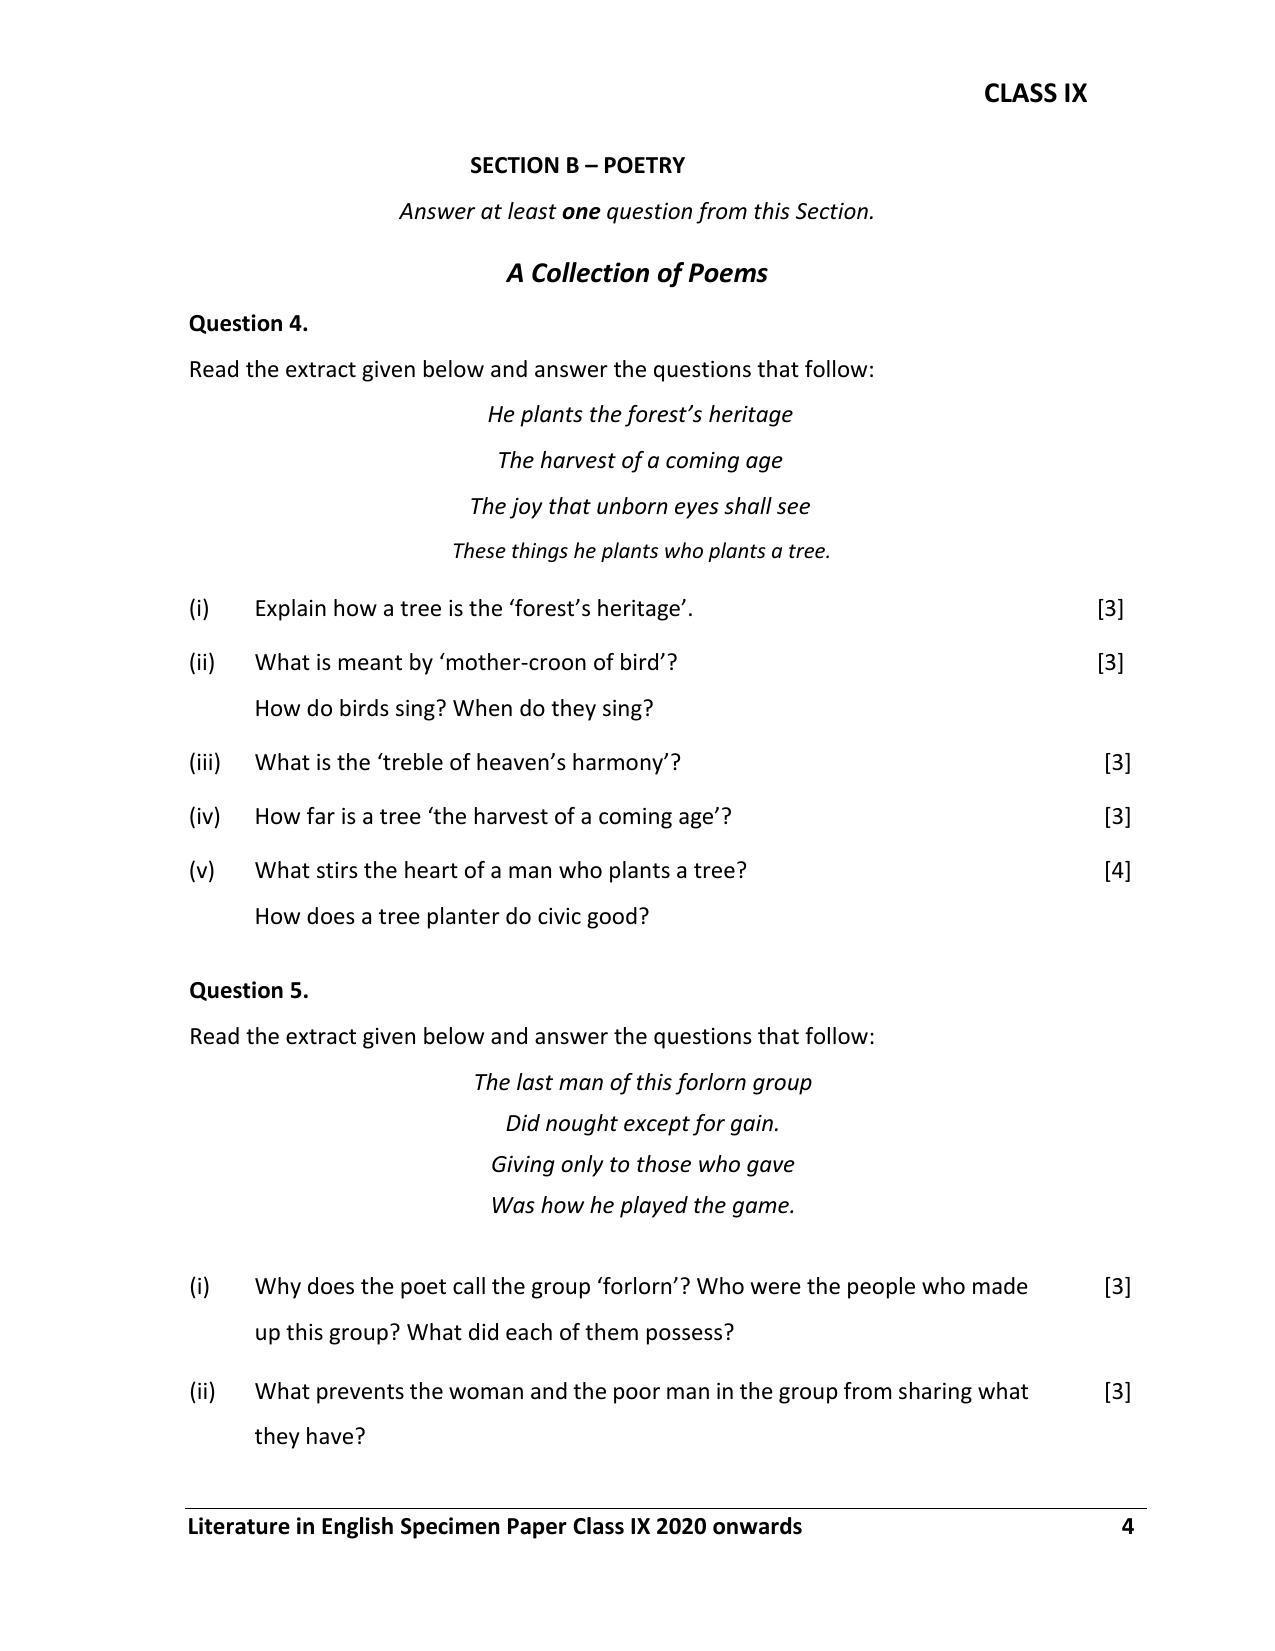  ICSE Class 9 English Paper 2 (LITERATURE IN ENGLISH) Sample Paper - Page 4